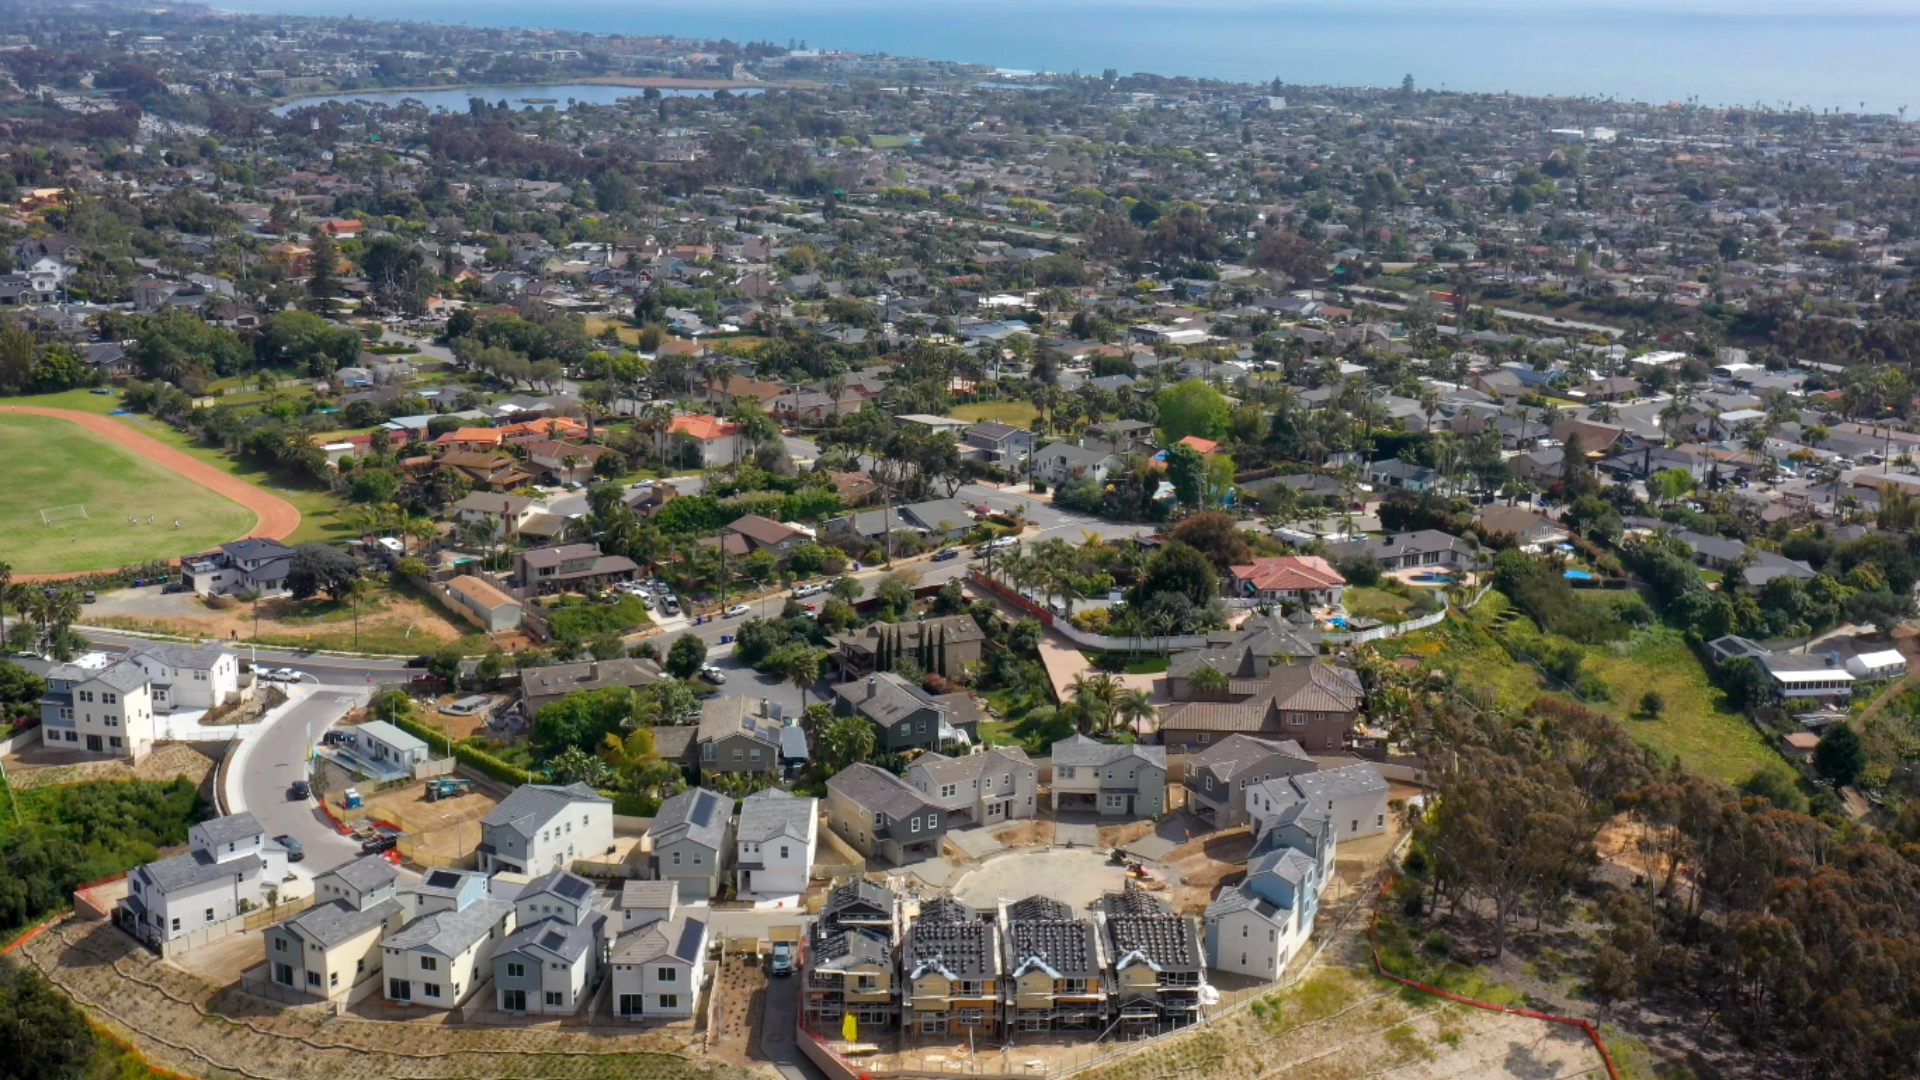 Image from the April drone trip at 26Tides in Oceanside